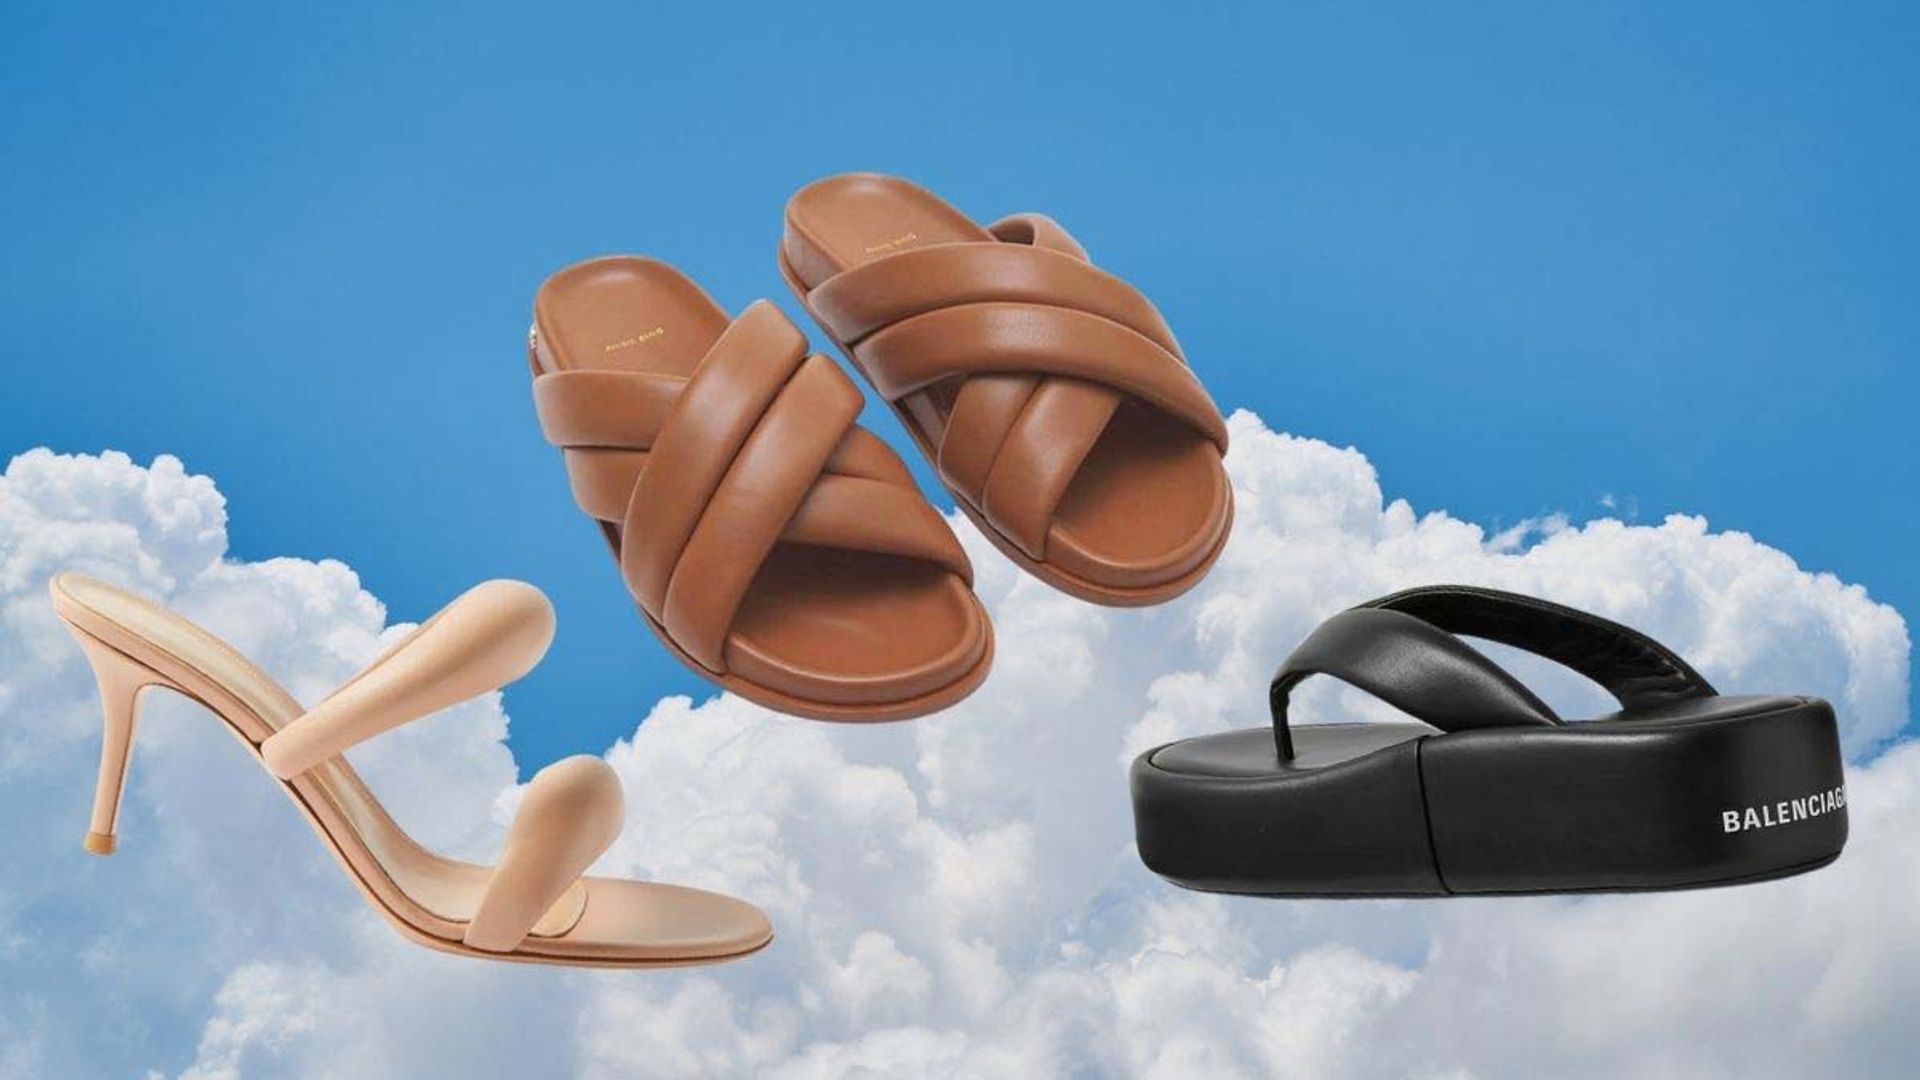 Puffed to perfection: the 6 best pairs of padded sandals